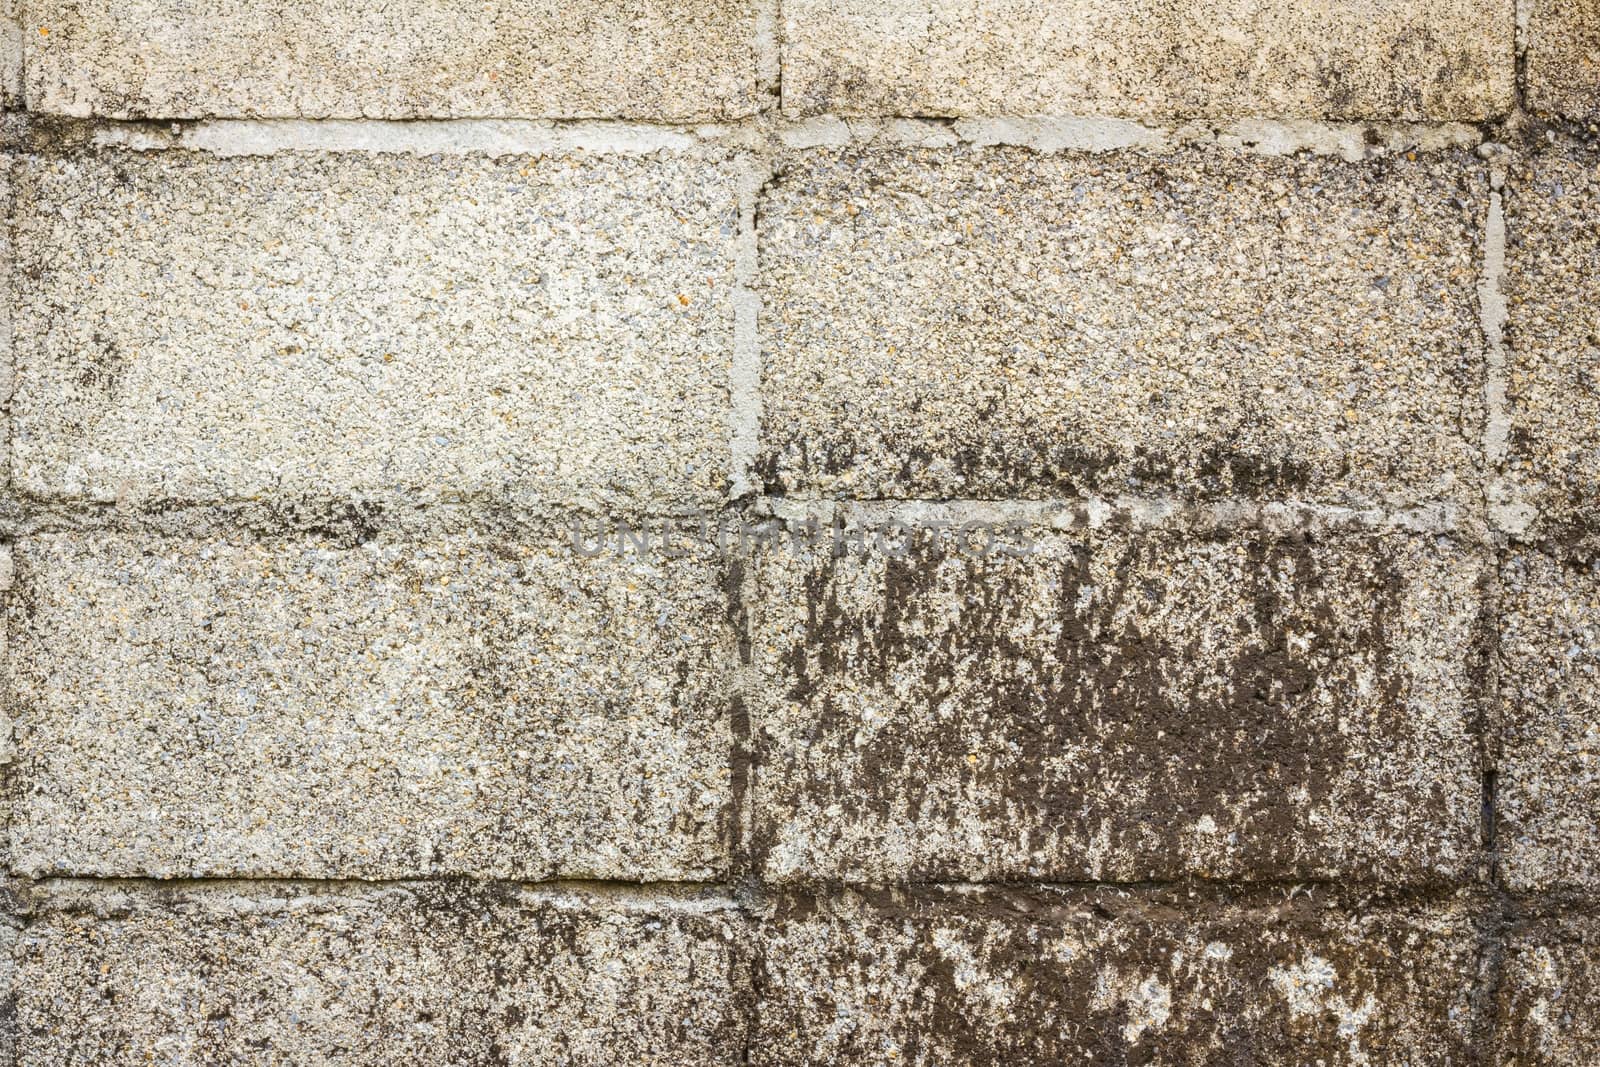 Hollow brick wall with grunge texture, background, close-up